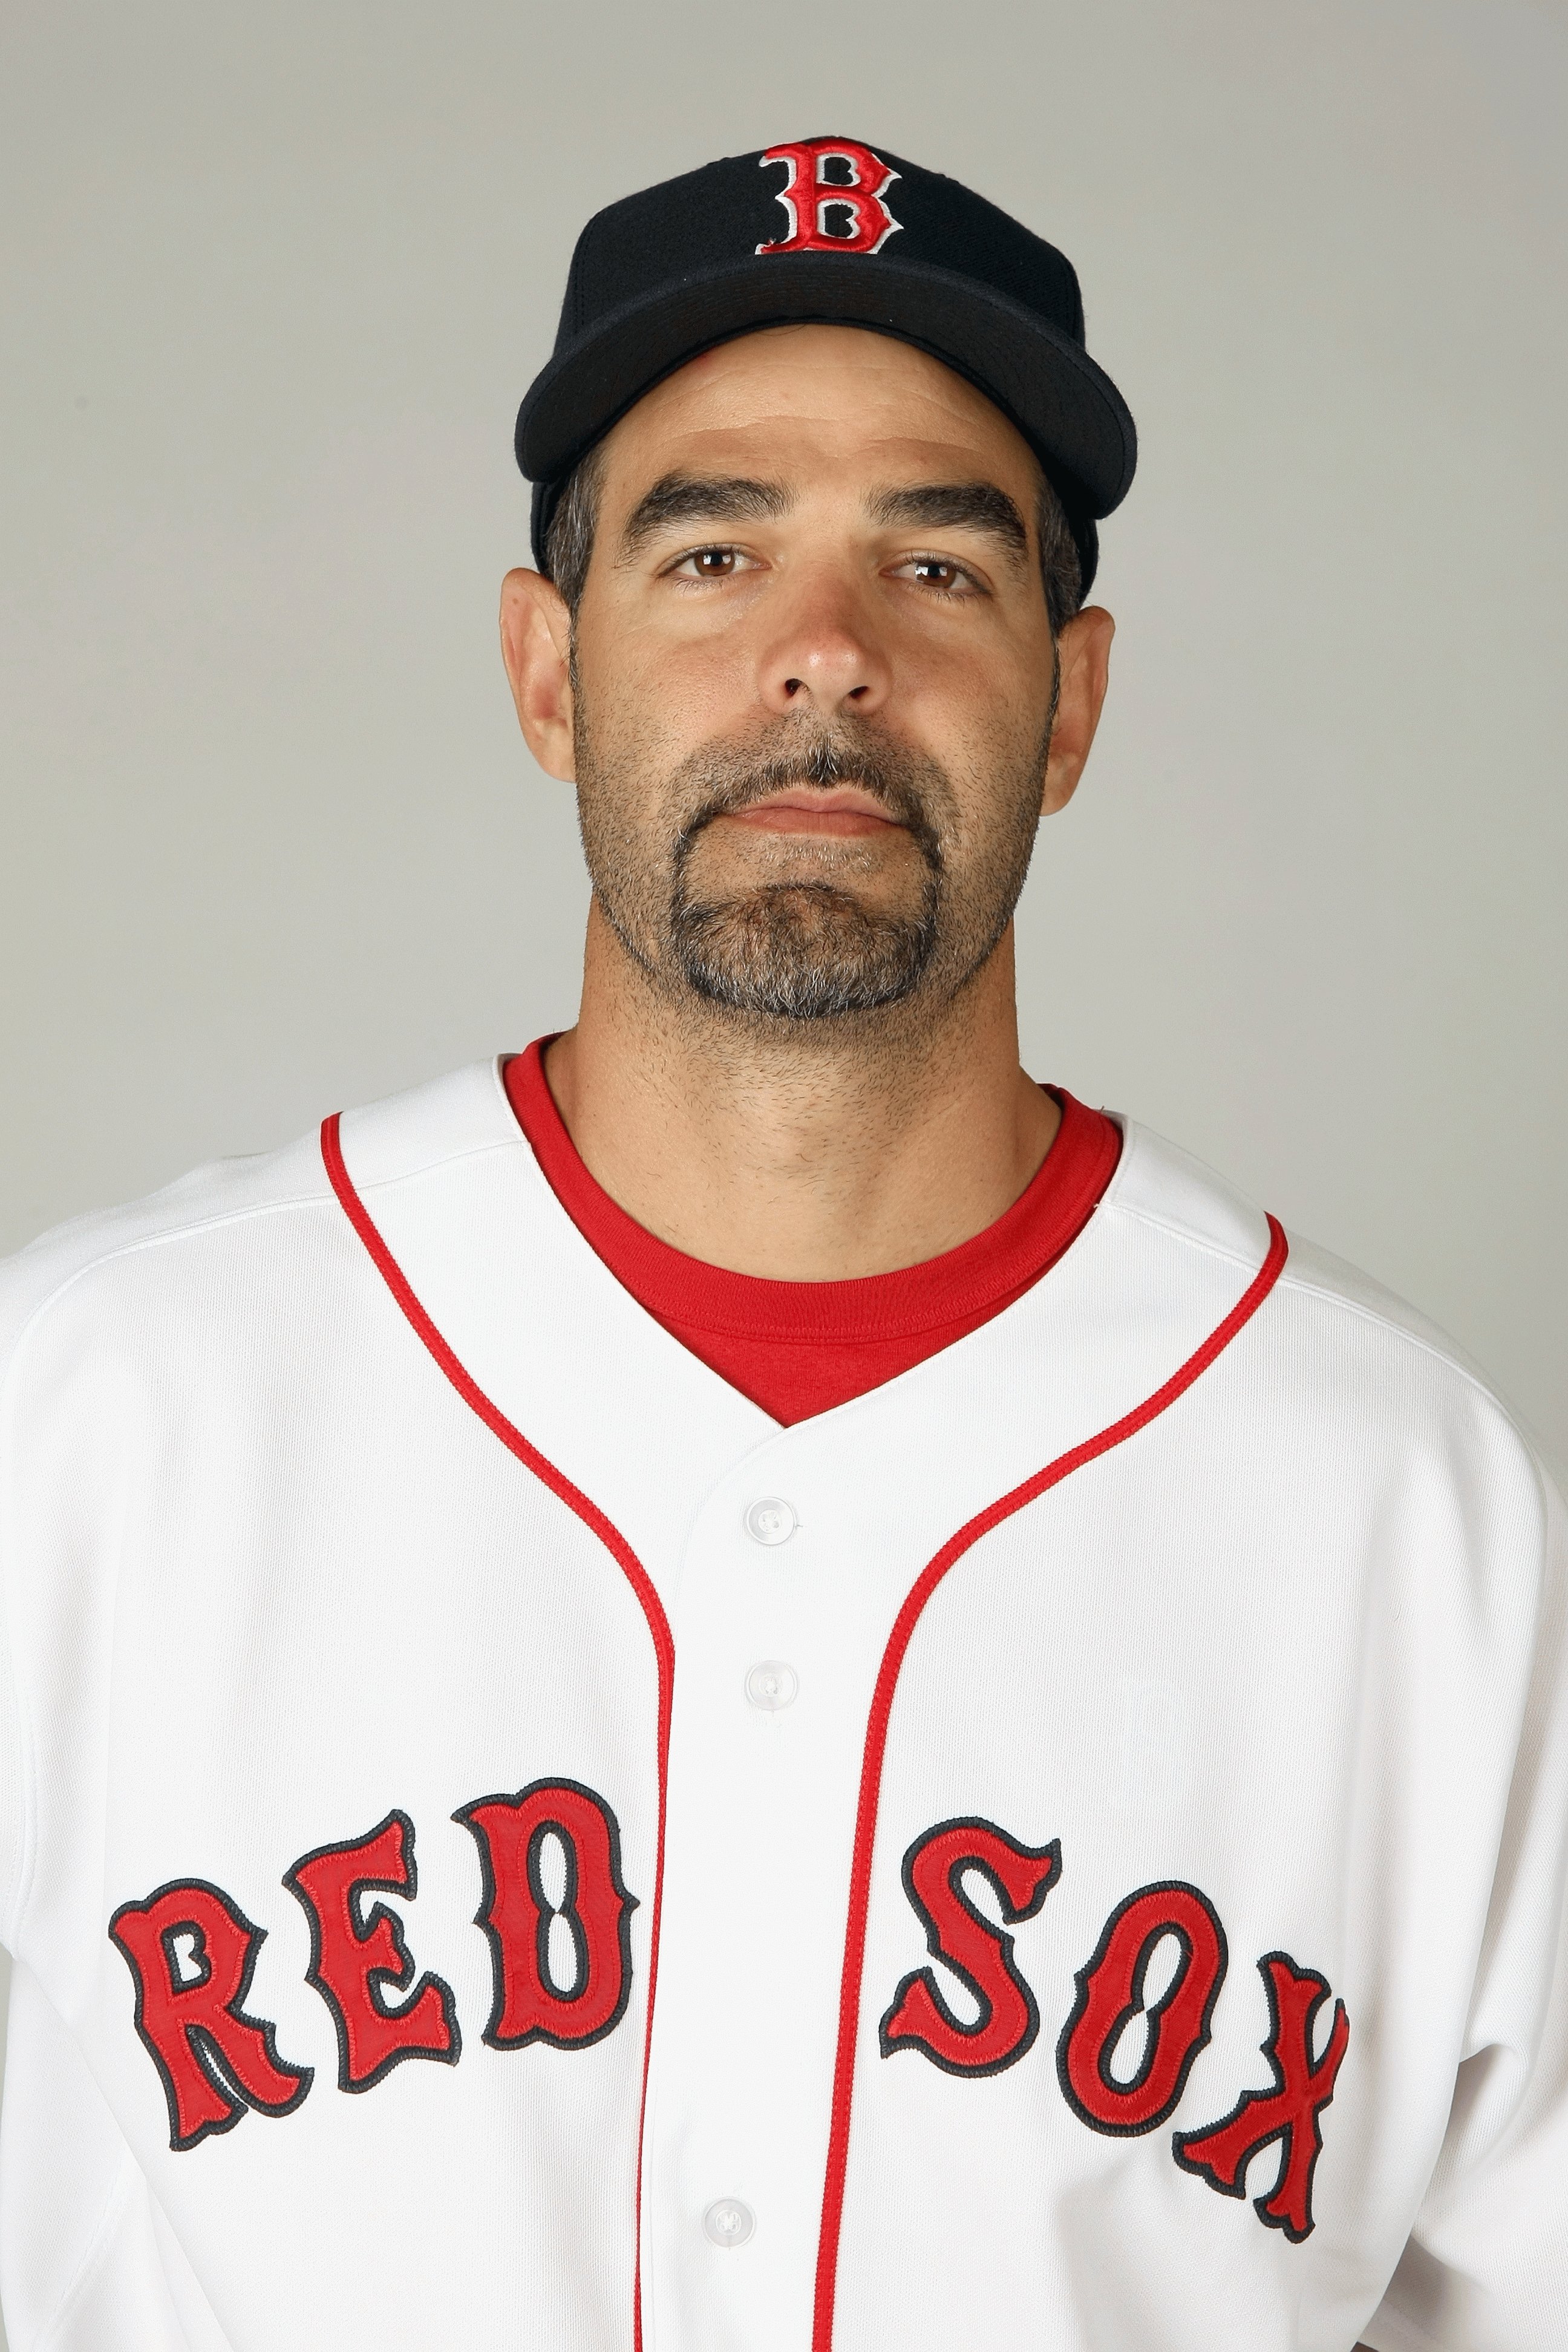 Mike Lowell homers 3 times in a game for Pawtucket Red Sox. Now